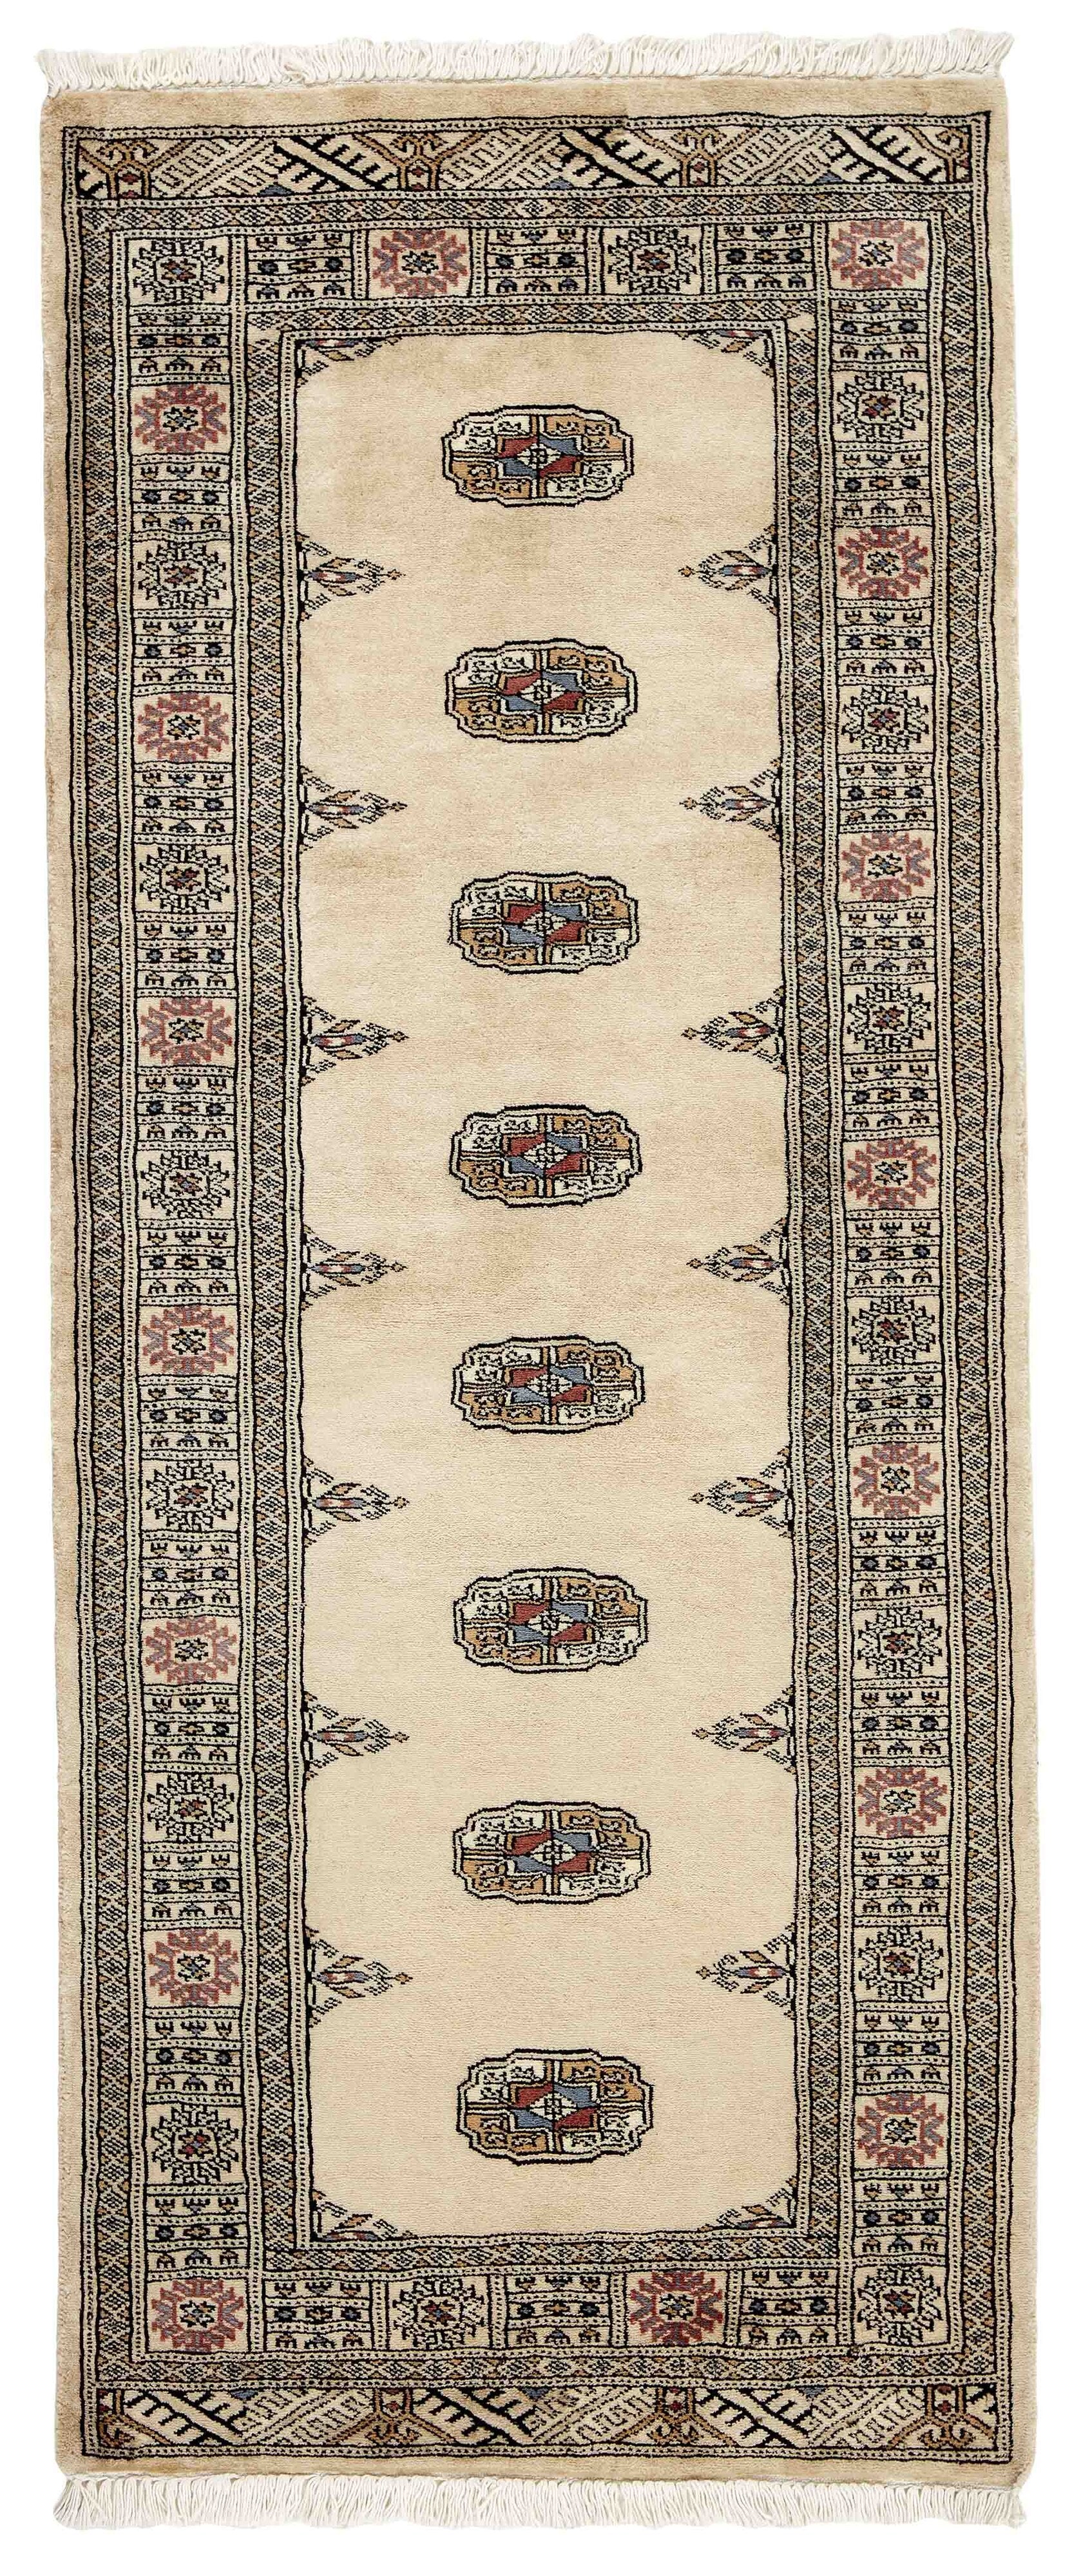 Beige Oriental runner with traditional bordered pattern